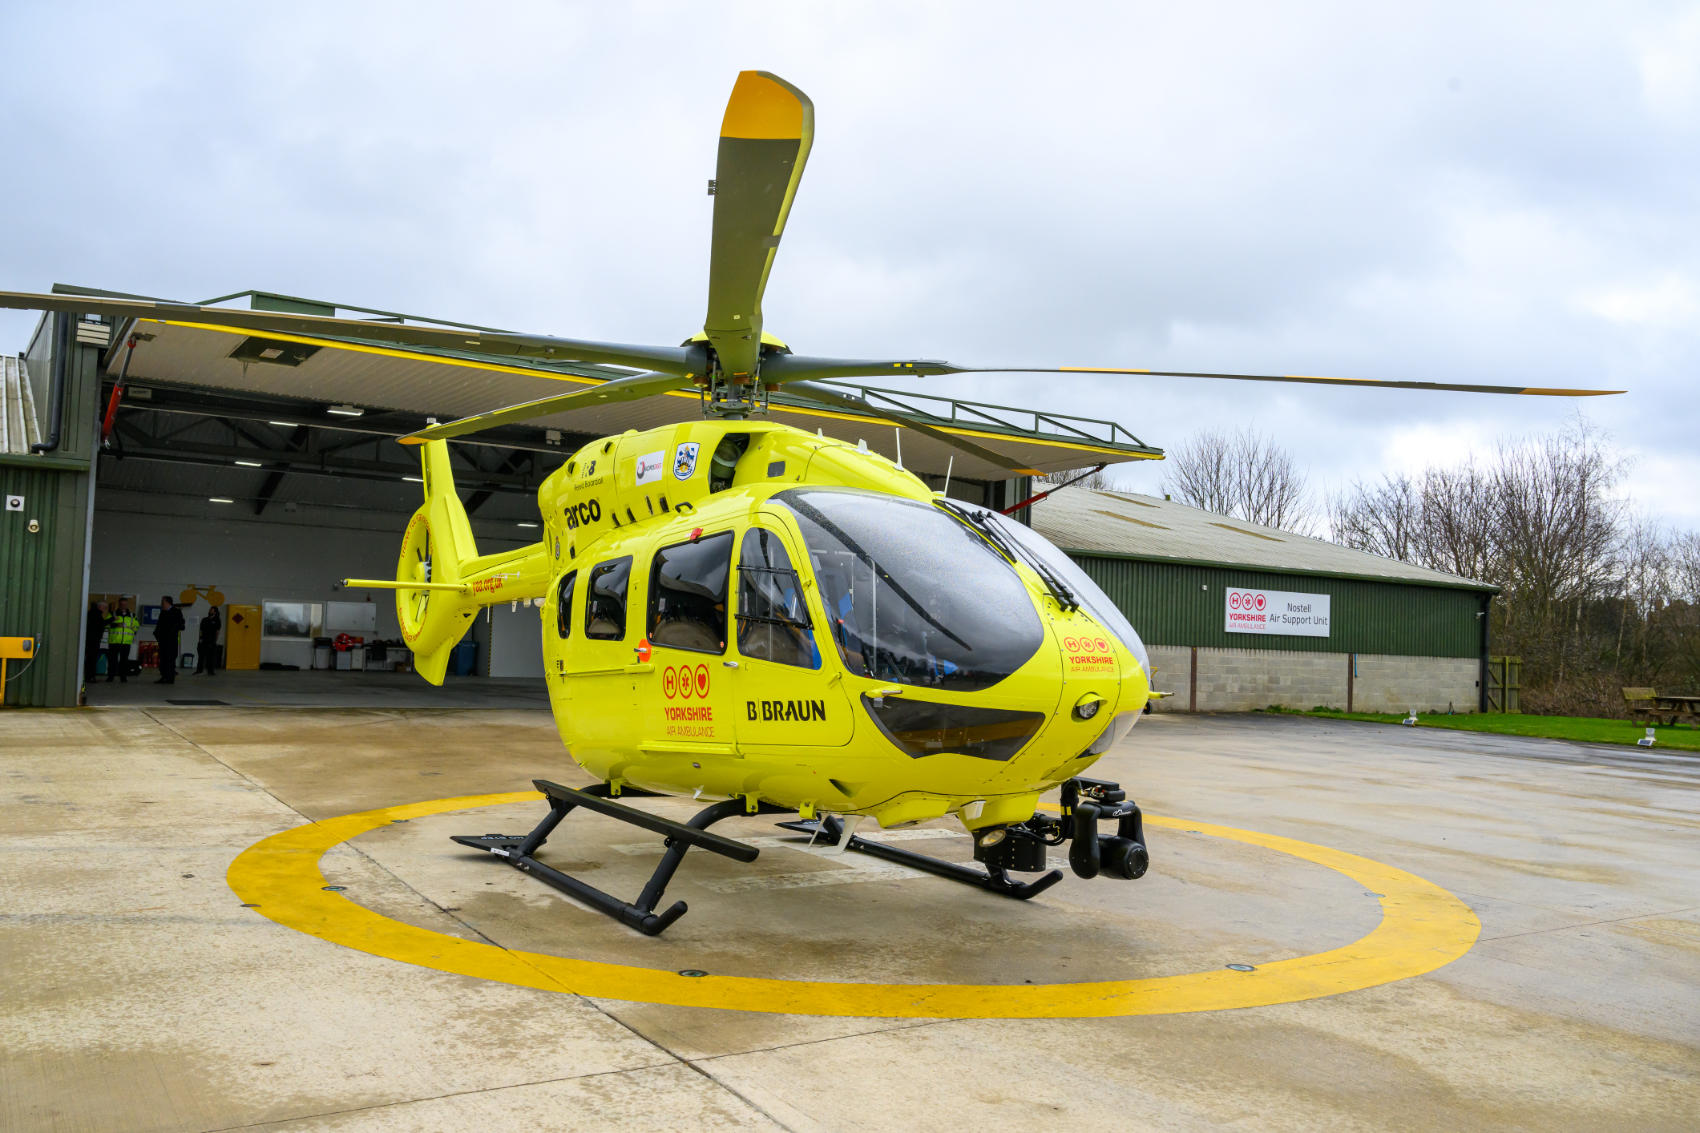 Yorkshire Air Ambulance Unveils its new helicopter - G-YAAA